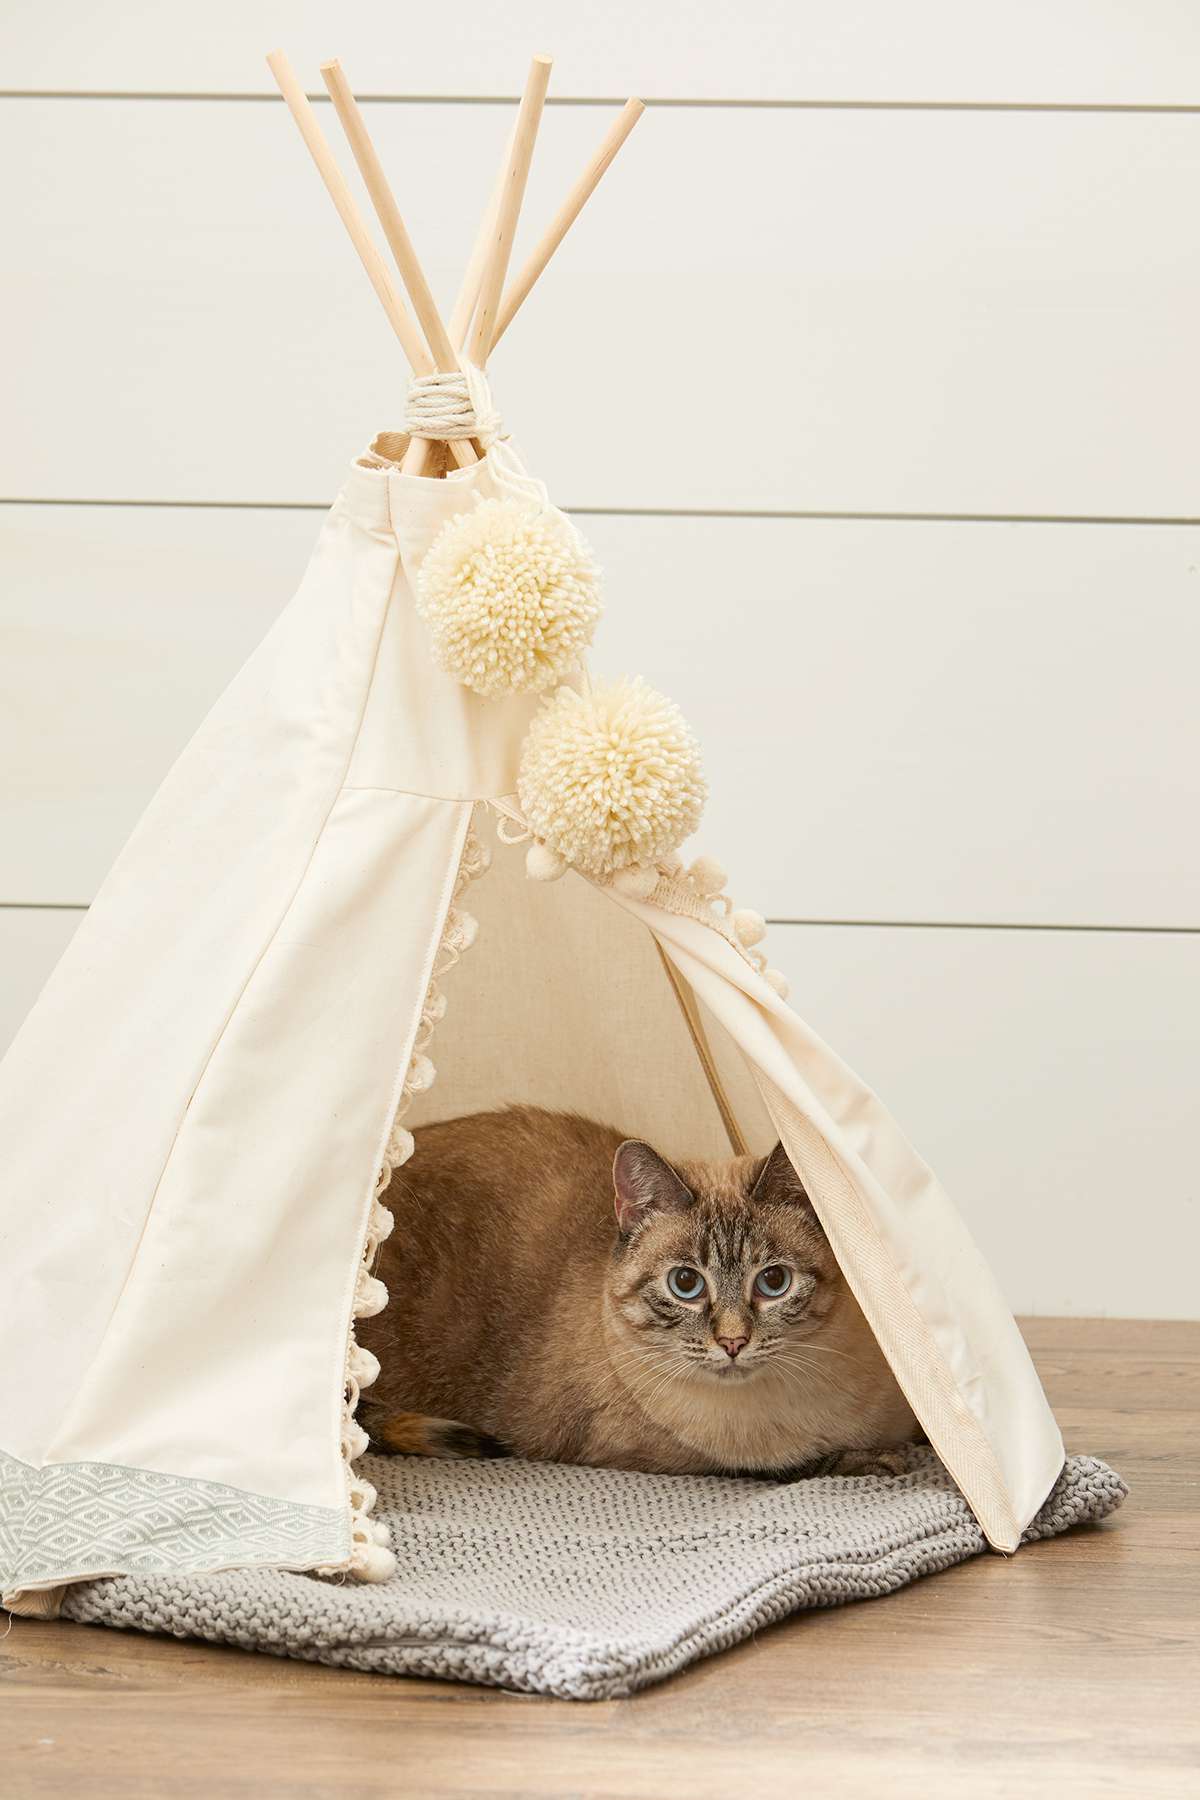 close-up cat lying in teepee looking out propped open door